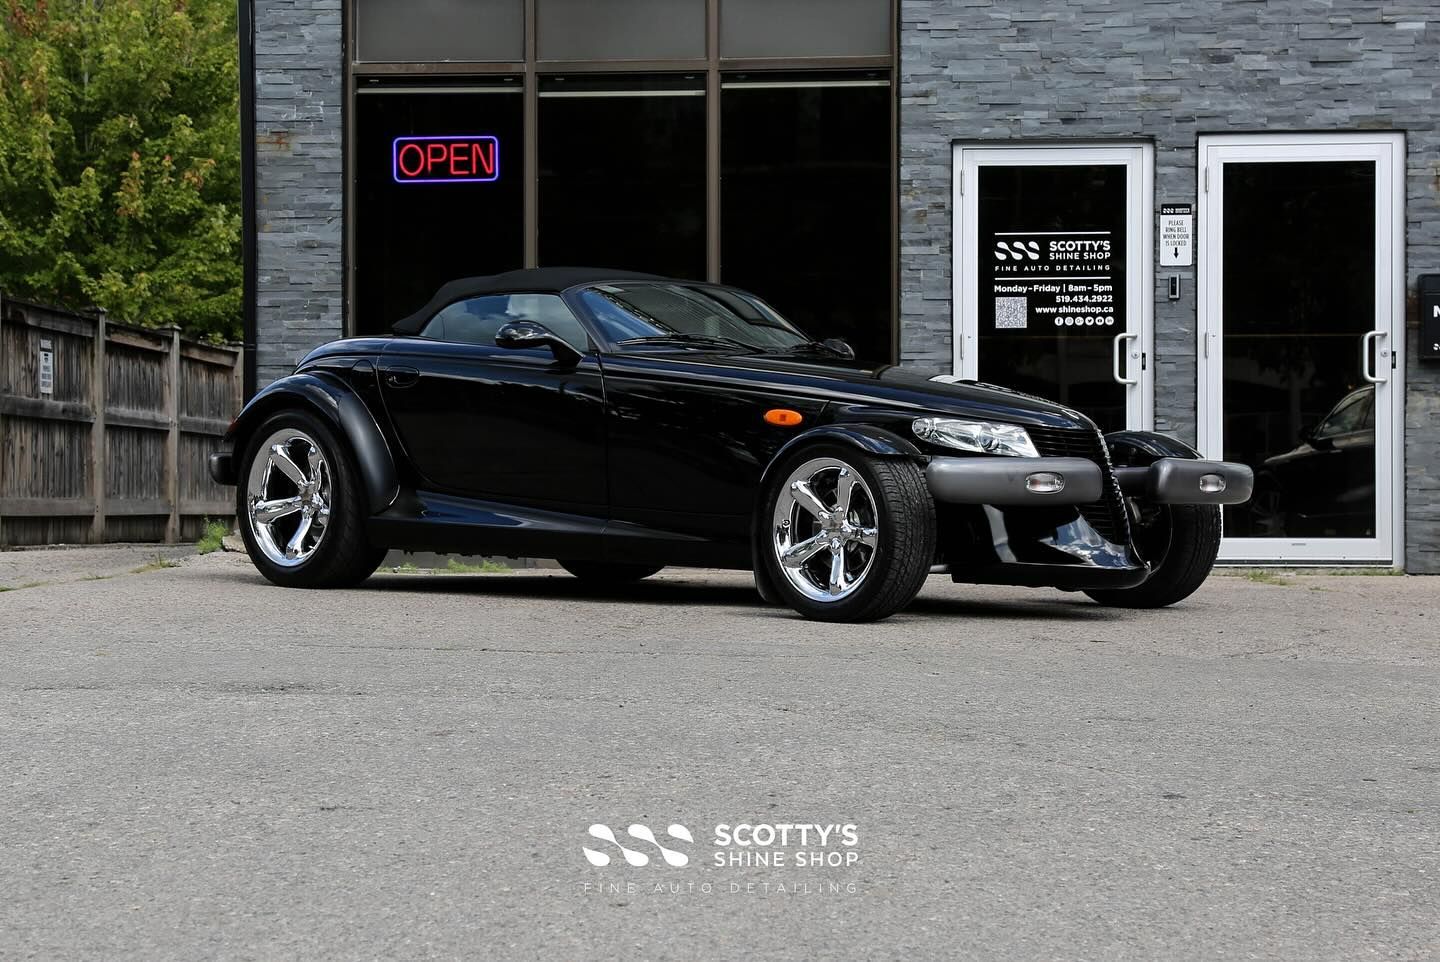 1999 Plymouth Prowler Detailing and Modesta BC-X ceramic coating London, ON Canada